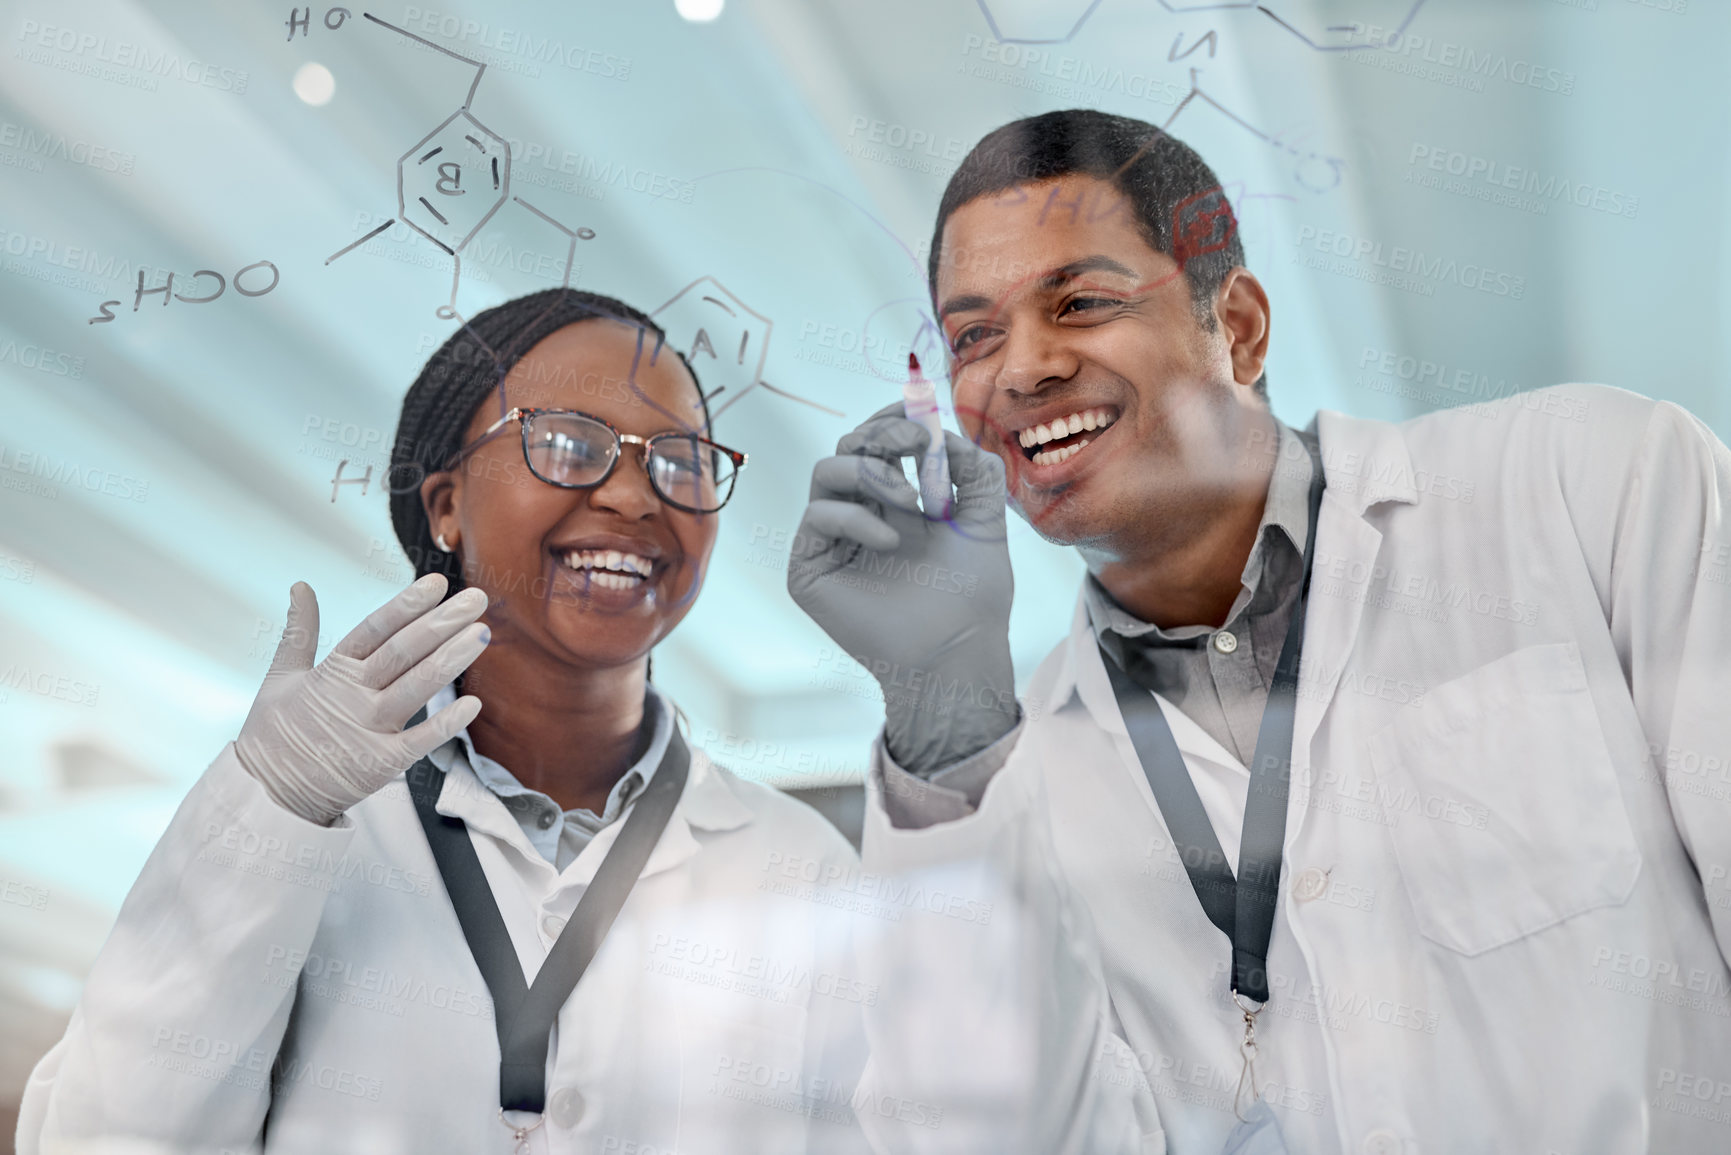 Buy stock photo Shot of two scientists drawing molecular structures on a glass wall in a lab